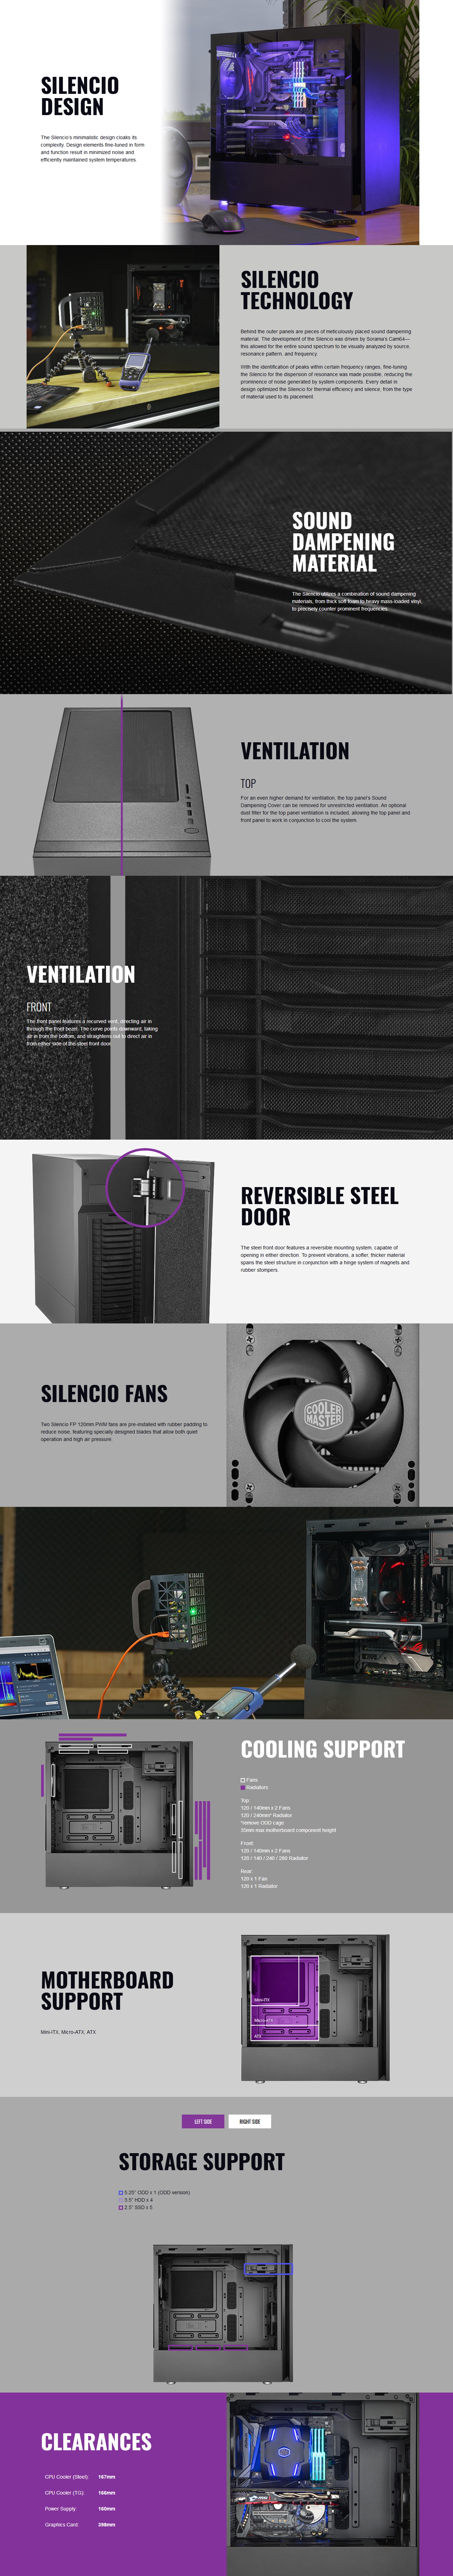 A large marketing image providing additional information about the product Cooler Master Silencio S600 TG Mid Tower Case - Black - Additional alt info not provided